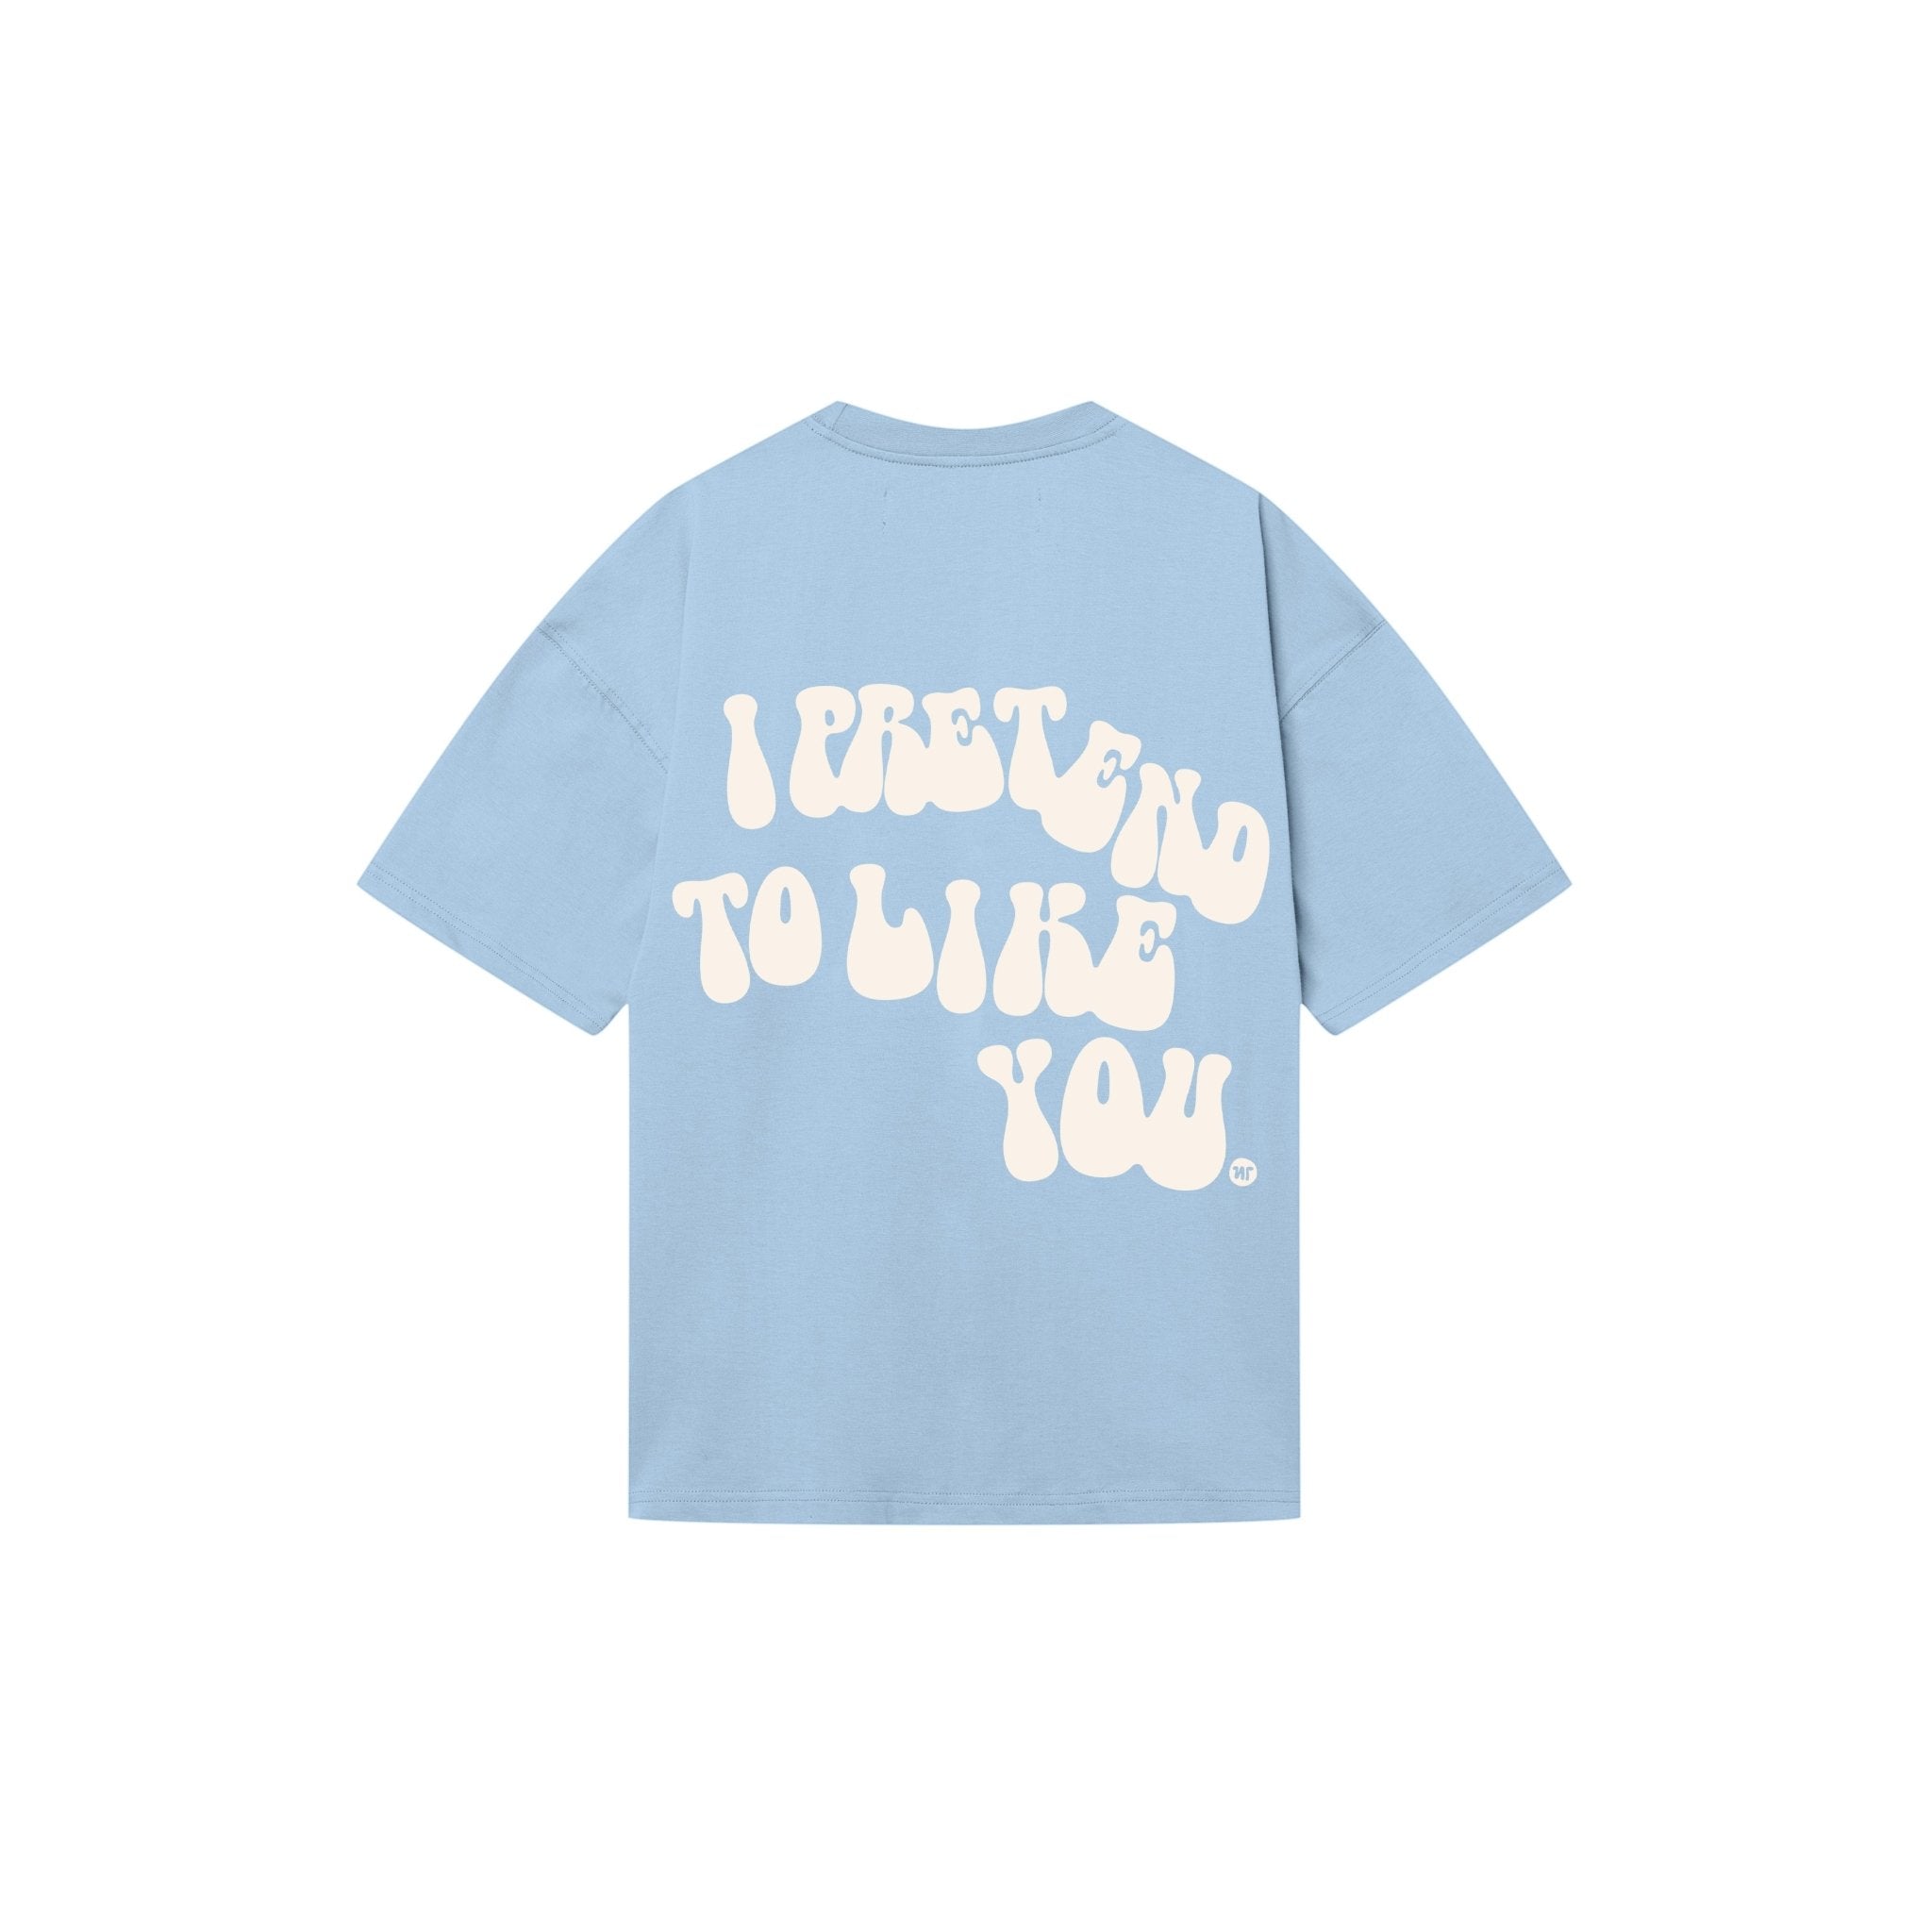 T-SHIRT I PRETEND TO LIKE YOU BABY BLUE - Nous Tous